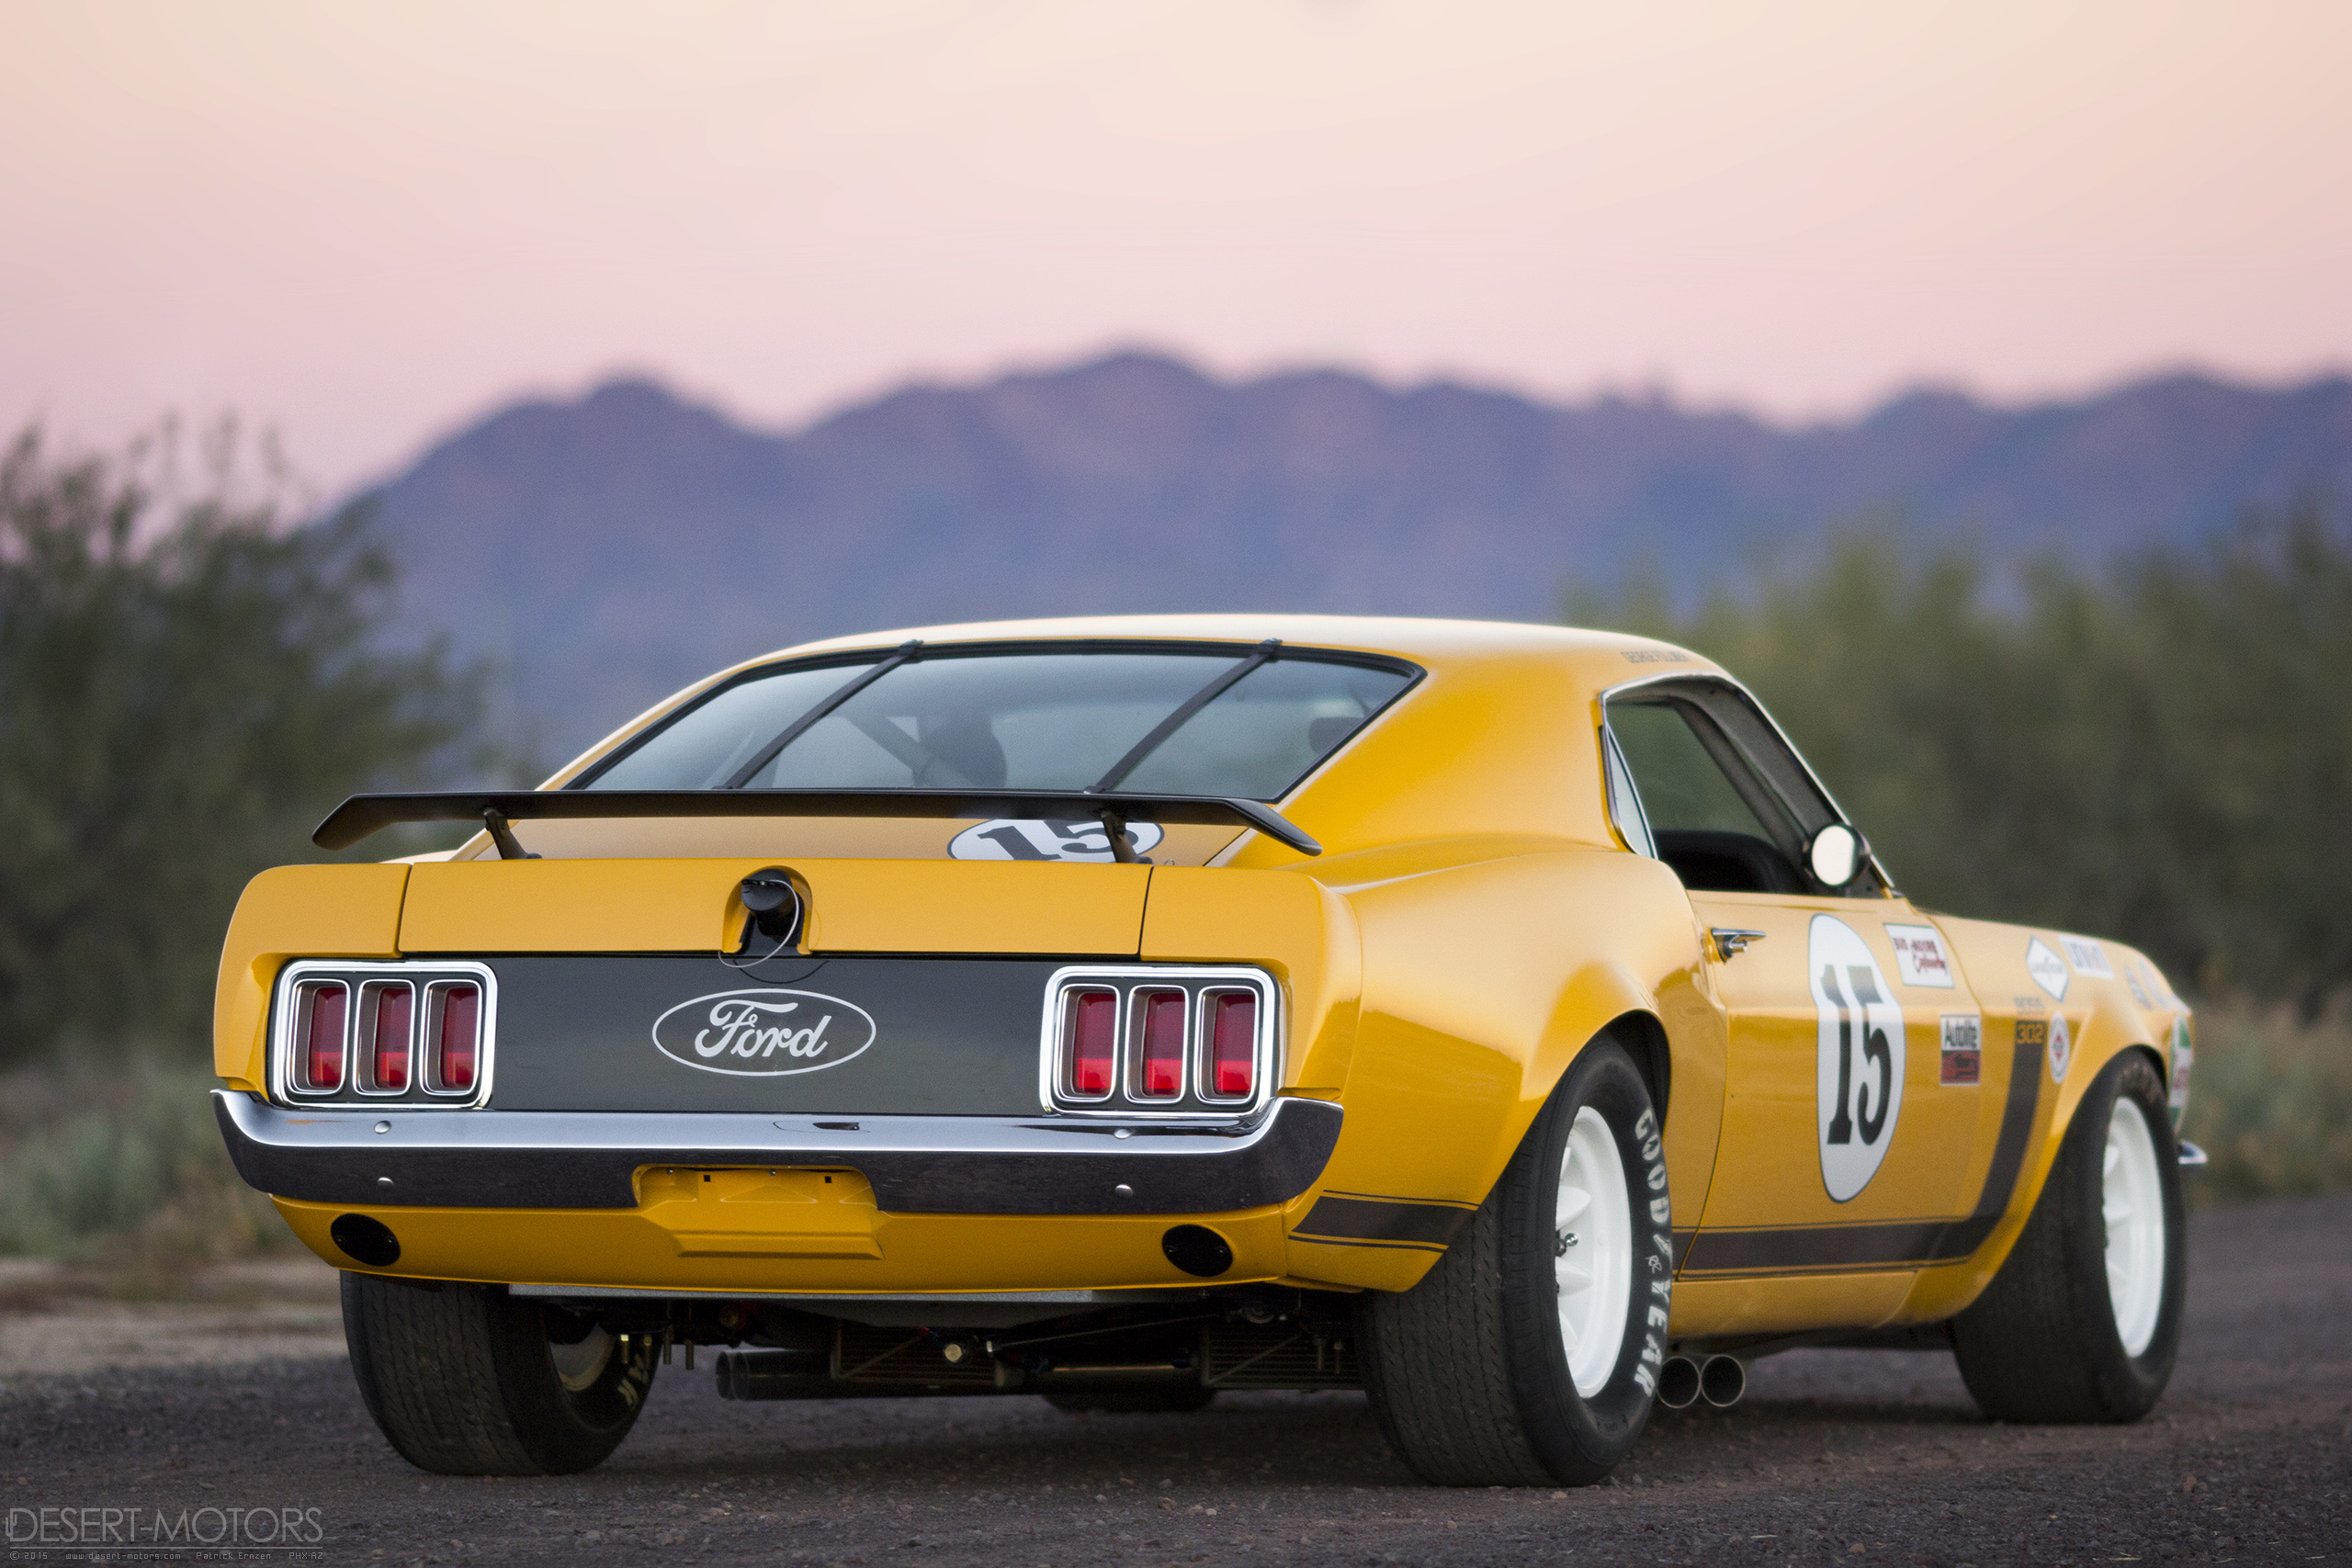 General 2560x1707 Ford Mustang yellow cars race cars muscle cars livery desert road American cars pony cars Ford Desert Motors watermarked